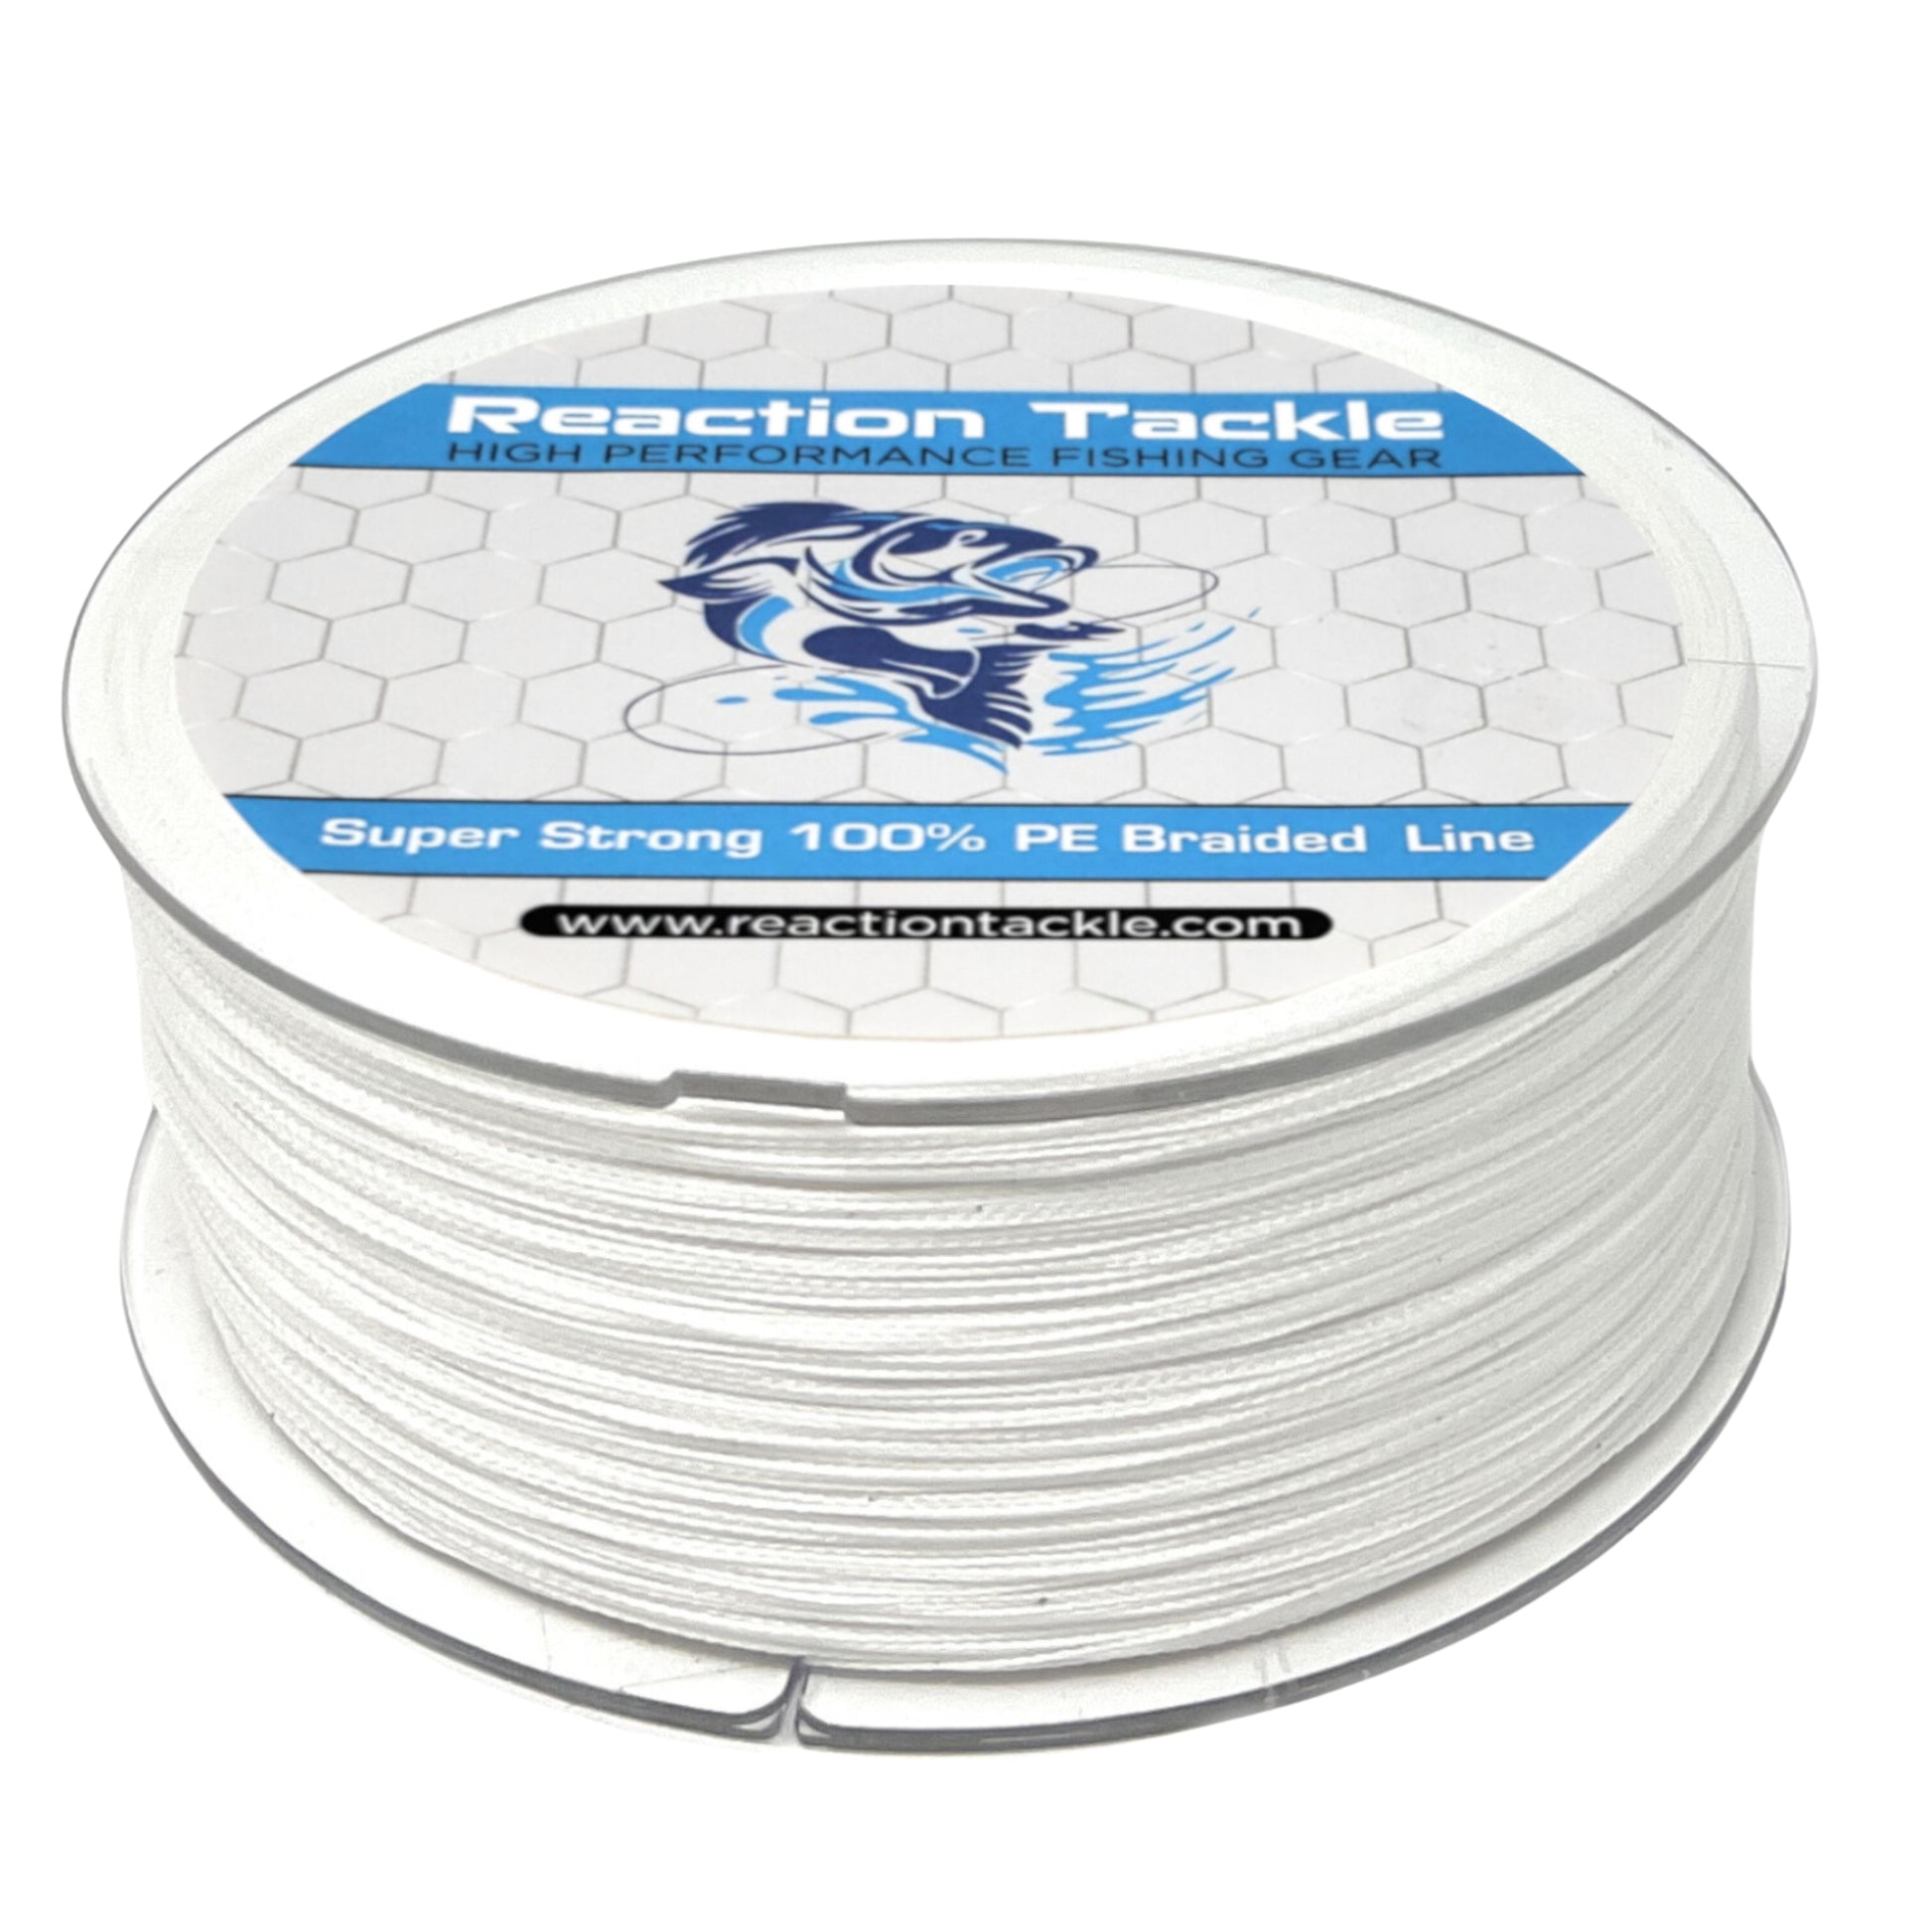 Braided Fishing Line for new Rod @Reaction Tackle #fishing #fishinglin